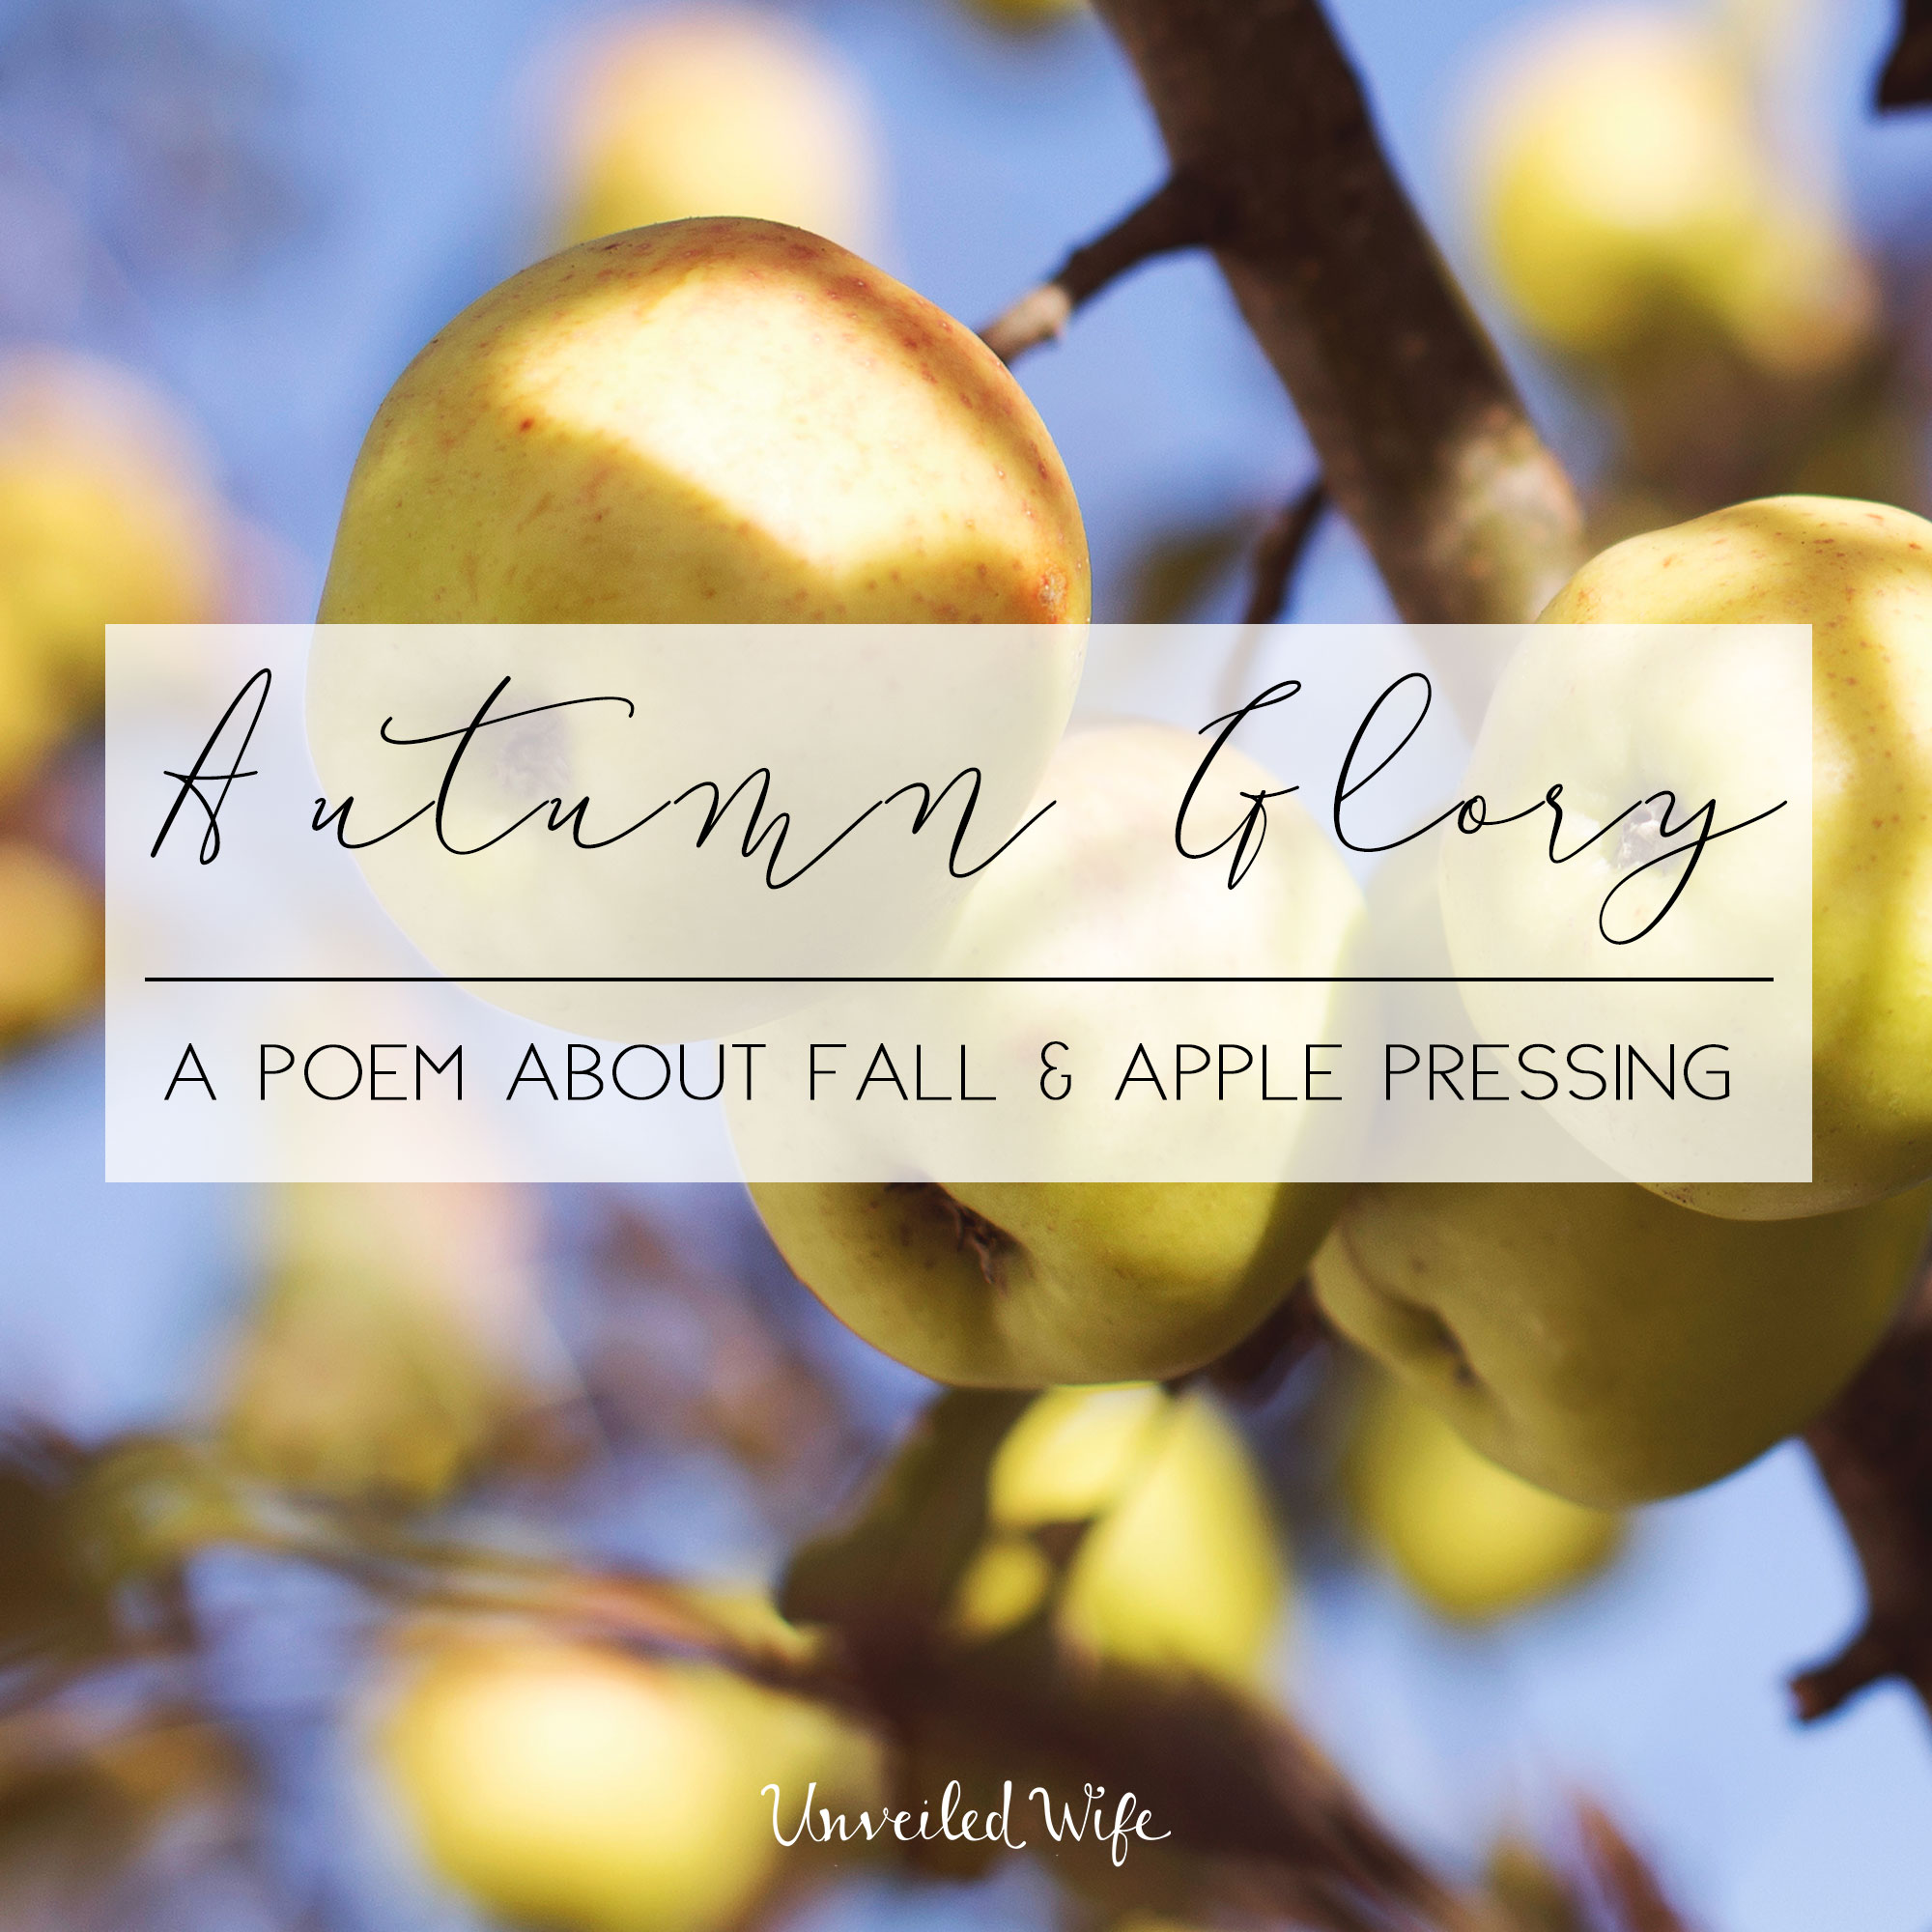 Autumn Glory | A Poem About Fall & Apple Pressing